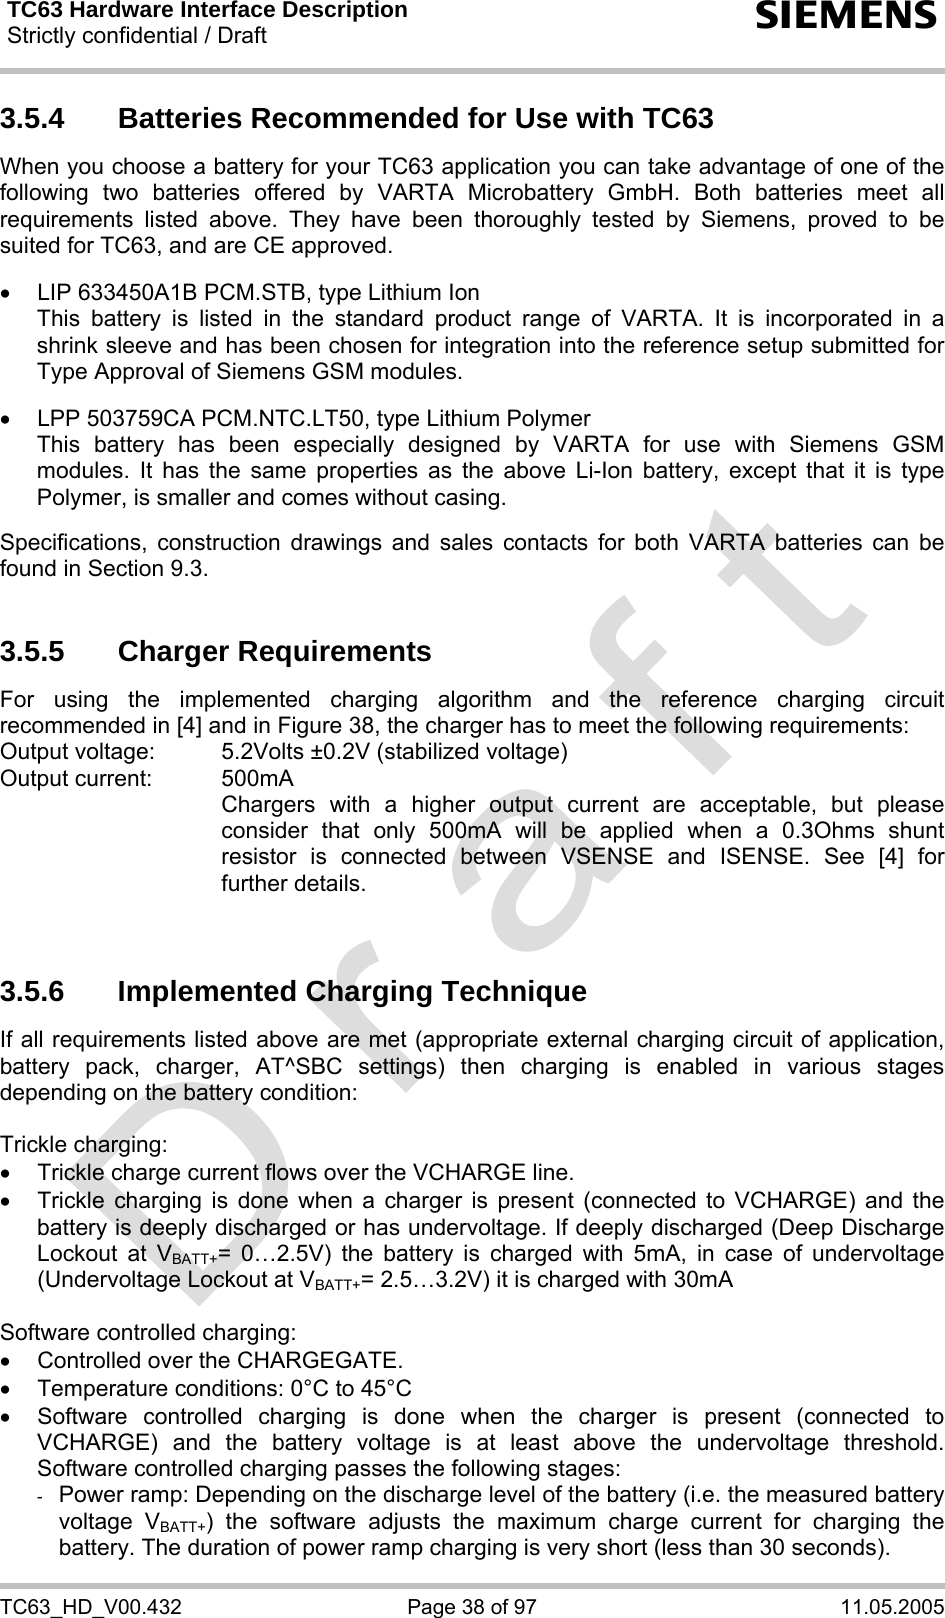 TC63 Hardware Interface Description Strictly confidential / Draft  s TC63_HD_V00.432  Page 38 of 97  11.05.2005 3.5.4  Batteries Recommended for Use with TC63 When you choose a battery for your TC63 application you can take advantage of one of the following two batteries offered by VARTA Microbattery GmbH. Both batteries meet all requirements listed above. They have been thoroughly tested by Siemens, proved to be suited for TC63, and are CE approved.  •  LIP 633450A1B PCM.STB, type Lithium Ion This battery is listed in the standard product range of VARTA. It is incorporated in a shrink sleeve and has been chosen for integration into the reference setup submitted for Type Approval of Siemens GSM modules.  •  LPP 503759CA PCM.NTC.LT50, type Lithium Polymer This battery has been especially designed by VARTA for use with Siemens GSM modules. It has the same properties as the above Li-Ion battery, except that it is type Polymer, is smaller and comes without casing.  Specifications, construction drawings and sales contacts for both VARTA batteries can be found in Section 9.3.   3.5.5 Charger Requirements For using the implemented charging algorithm and the reference charging circuit recommended in [4] and in Figure 38, the charger has to meet the following requirements: Output voltage:   5.2Volts ±0.2V (stabilized voltage) Output current:   500mA     Chargers with a higher output current are acceptable, but please consider that only 500mA will be applied when a 0.3Ohms shunt resistor is connected between VSENSE and ISENSE. See [4] for further details.   3.5.6  Implemented Charging Technique If all requirements listed above are met (appropriate external charging circuit of application, battery pack, charger, AT^SBC settings) then charging is enabled in various stages depending on the battery condition:   Trickle charging: •  Trickle charge current flows over the VCHARGE line. •  Trickle charging is done when a charger is present (connected to VCHARGE) and the battery is deeply discharged or has undervoltage. If deeply discharged (Deep Discharge Lockout at VBATT+= 0…2.5V) the battery is charged with 5mA, in case of undervoltage (Undervoltage Lockout at VBATT+= 2.5…3.2V) it is charged with 30mA  Software controlled charging: •  Controlled over the CHARGEGATE. •  Temperature conditions: 0°C to 45°C •  Software controlled charging is done when the charger is present (connected to VCHARGE) and the battery voltage is at least above the undervoltage threshold. Software controlled charging passes the following stages: -  Power ramp: Depending on the discharge level of the battery (i.e. the measured battery voltage VBATT+) the software adjusts the maximum charge current for charging the battery. The duration of power ramp charging is very short (less than 30 seconds). 